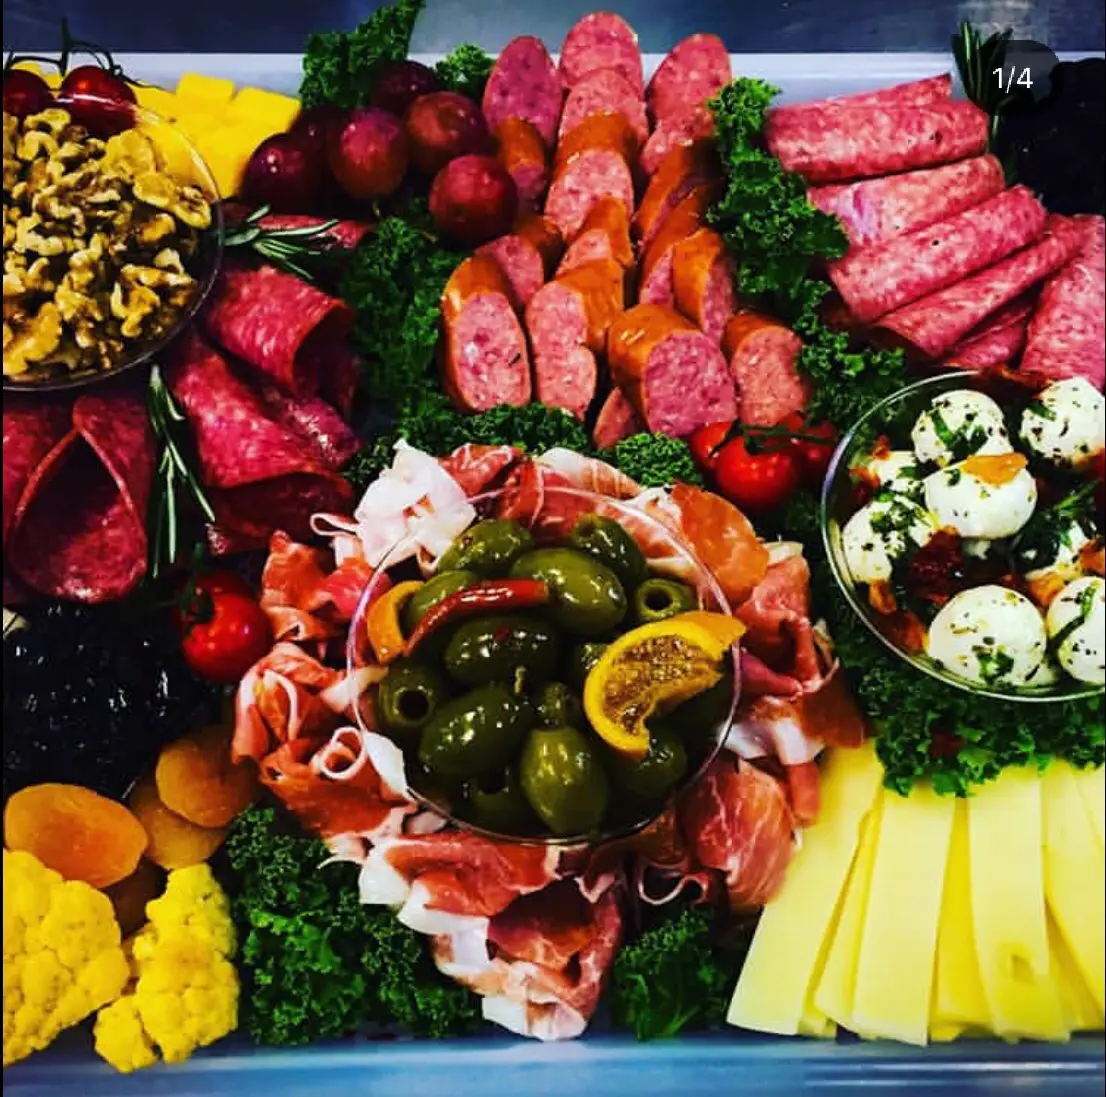 21 Of The Most Attractive Charcuterie Board Images - The Wonder Cottage